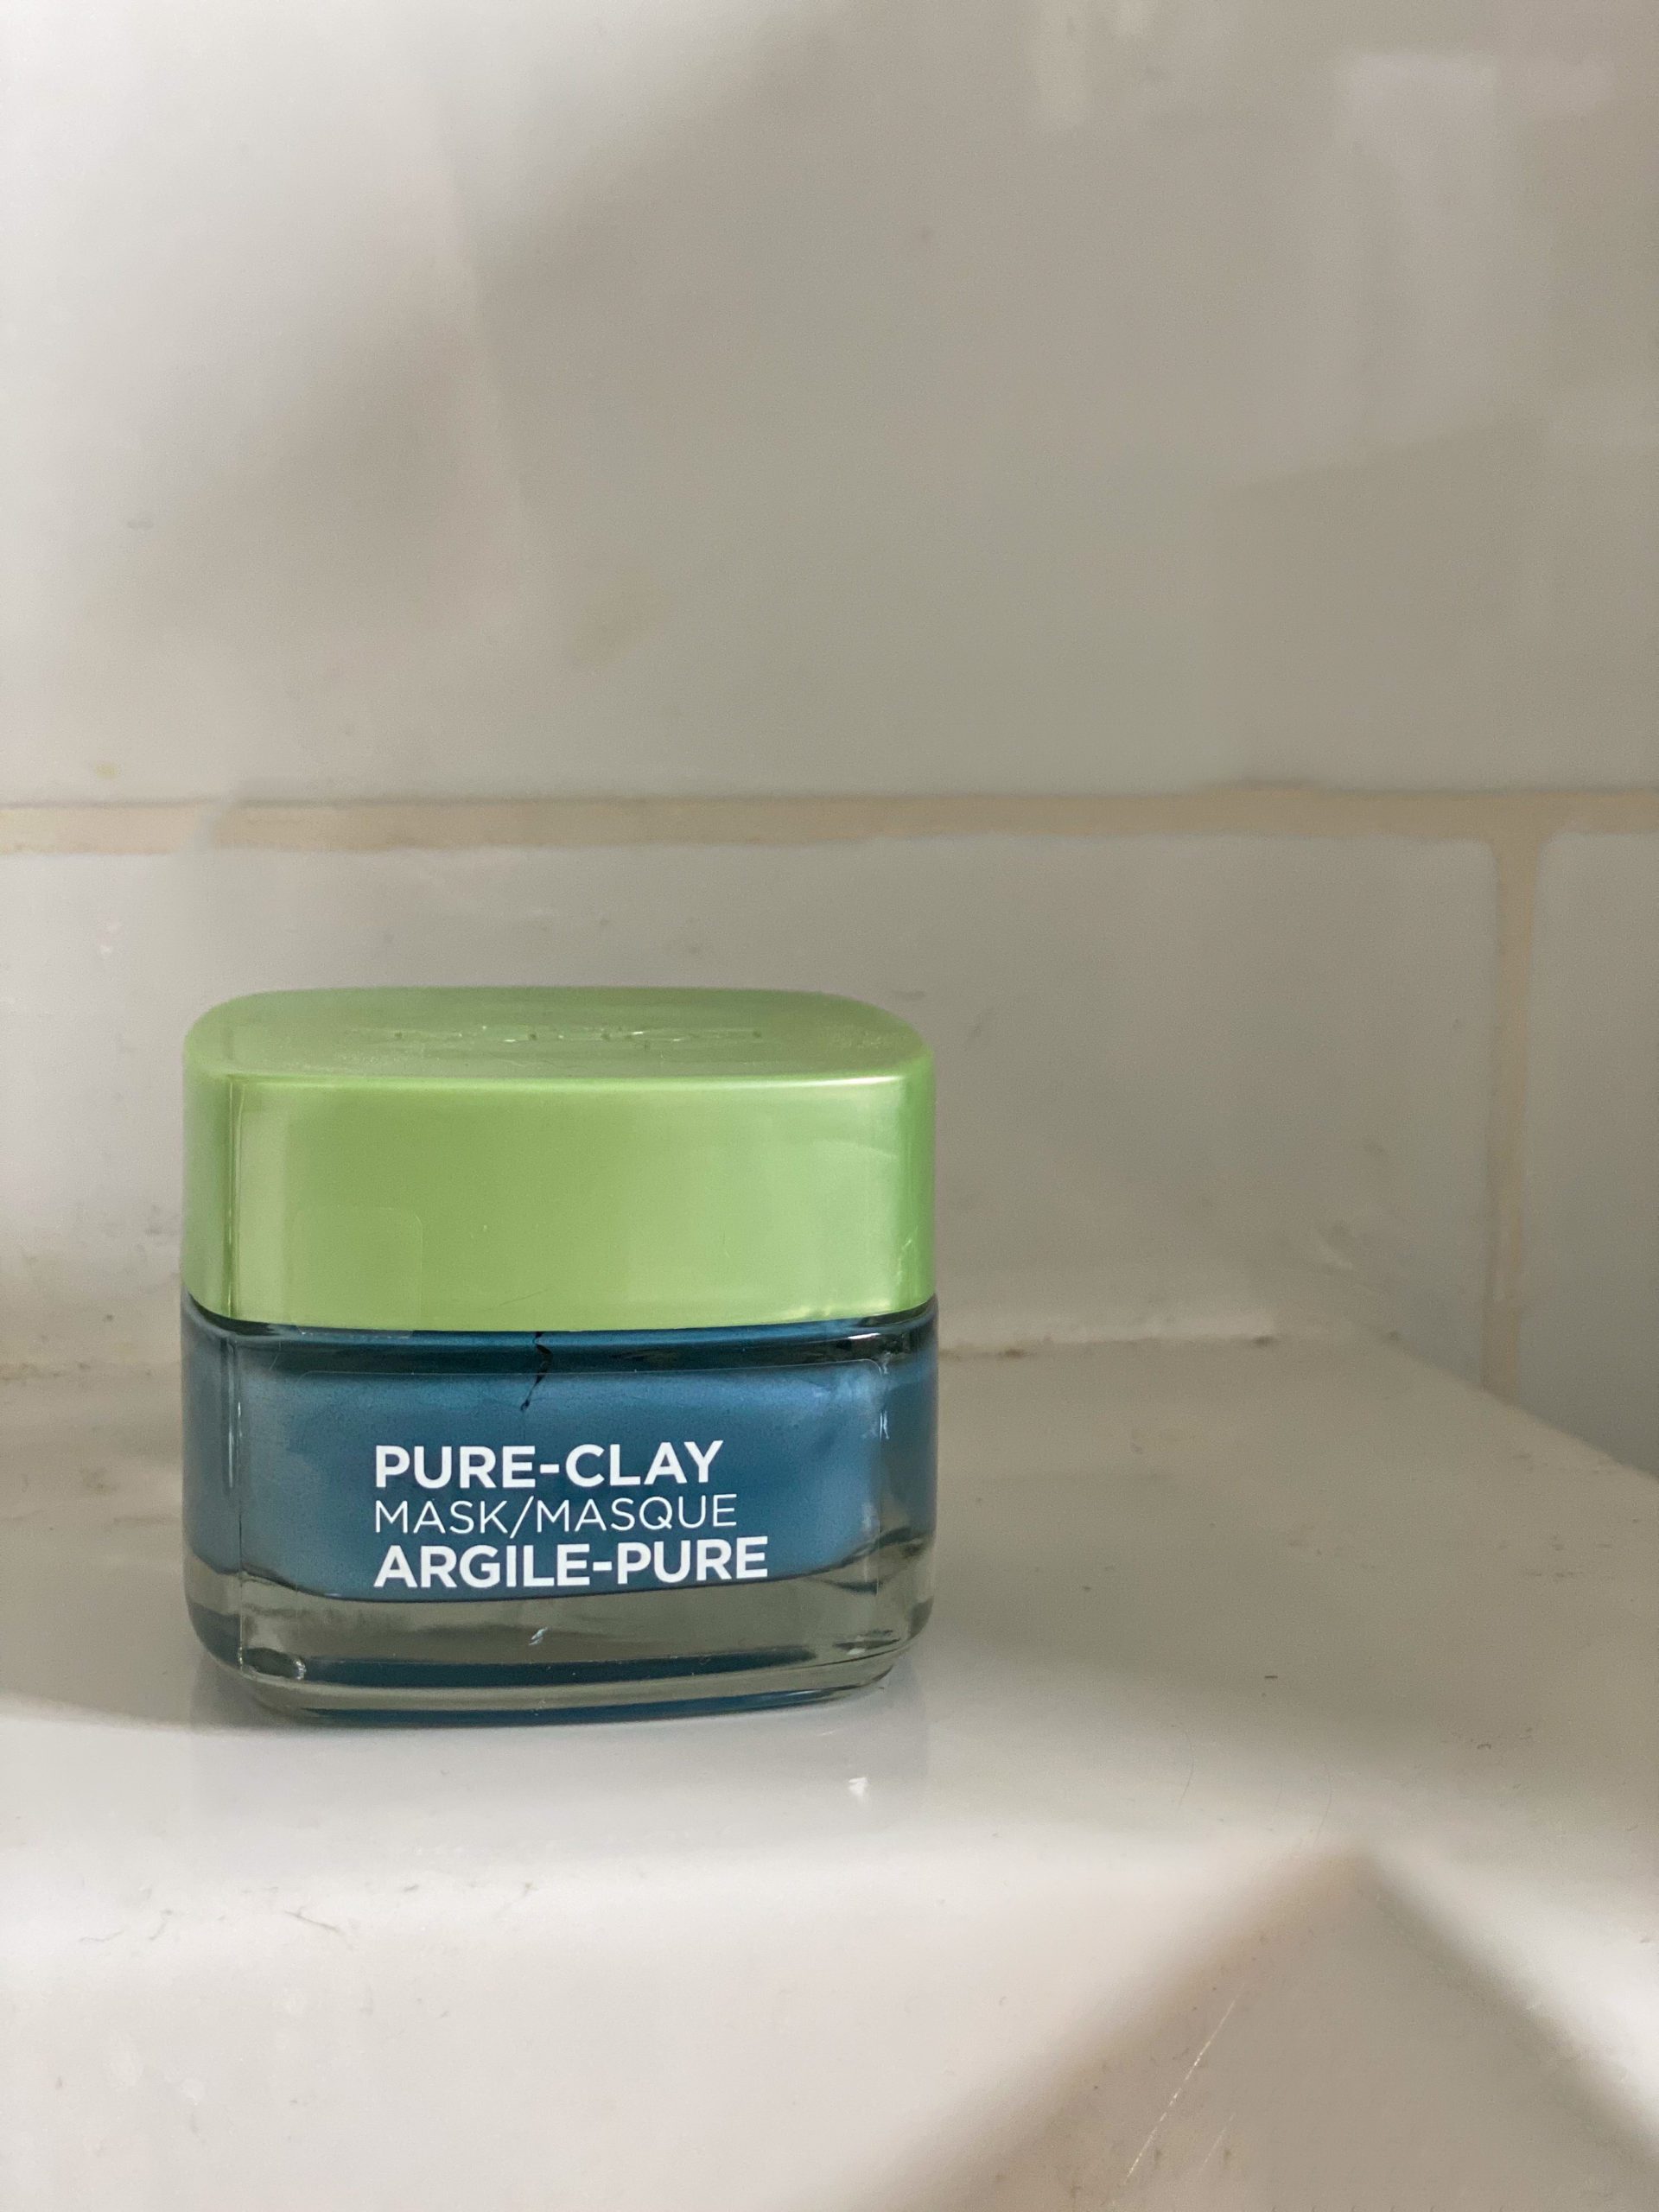 LOreal Pure Clay Mask Review